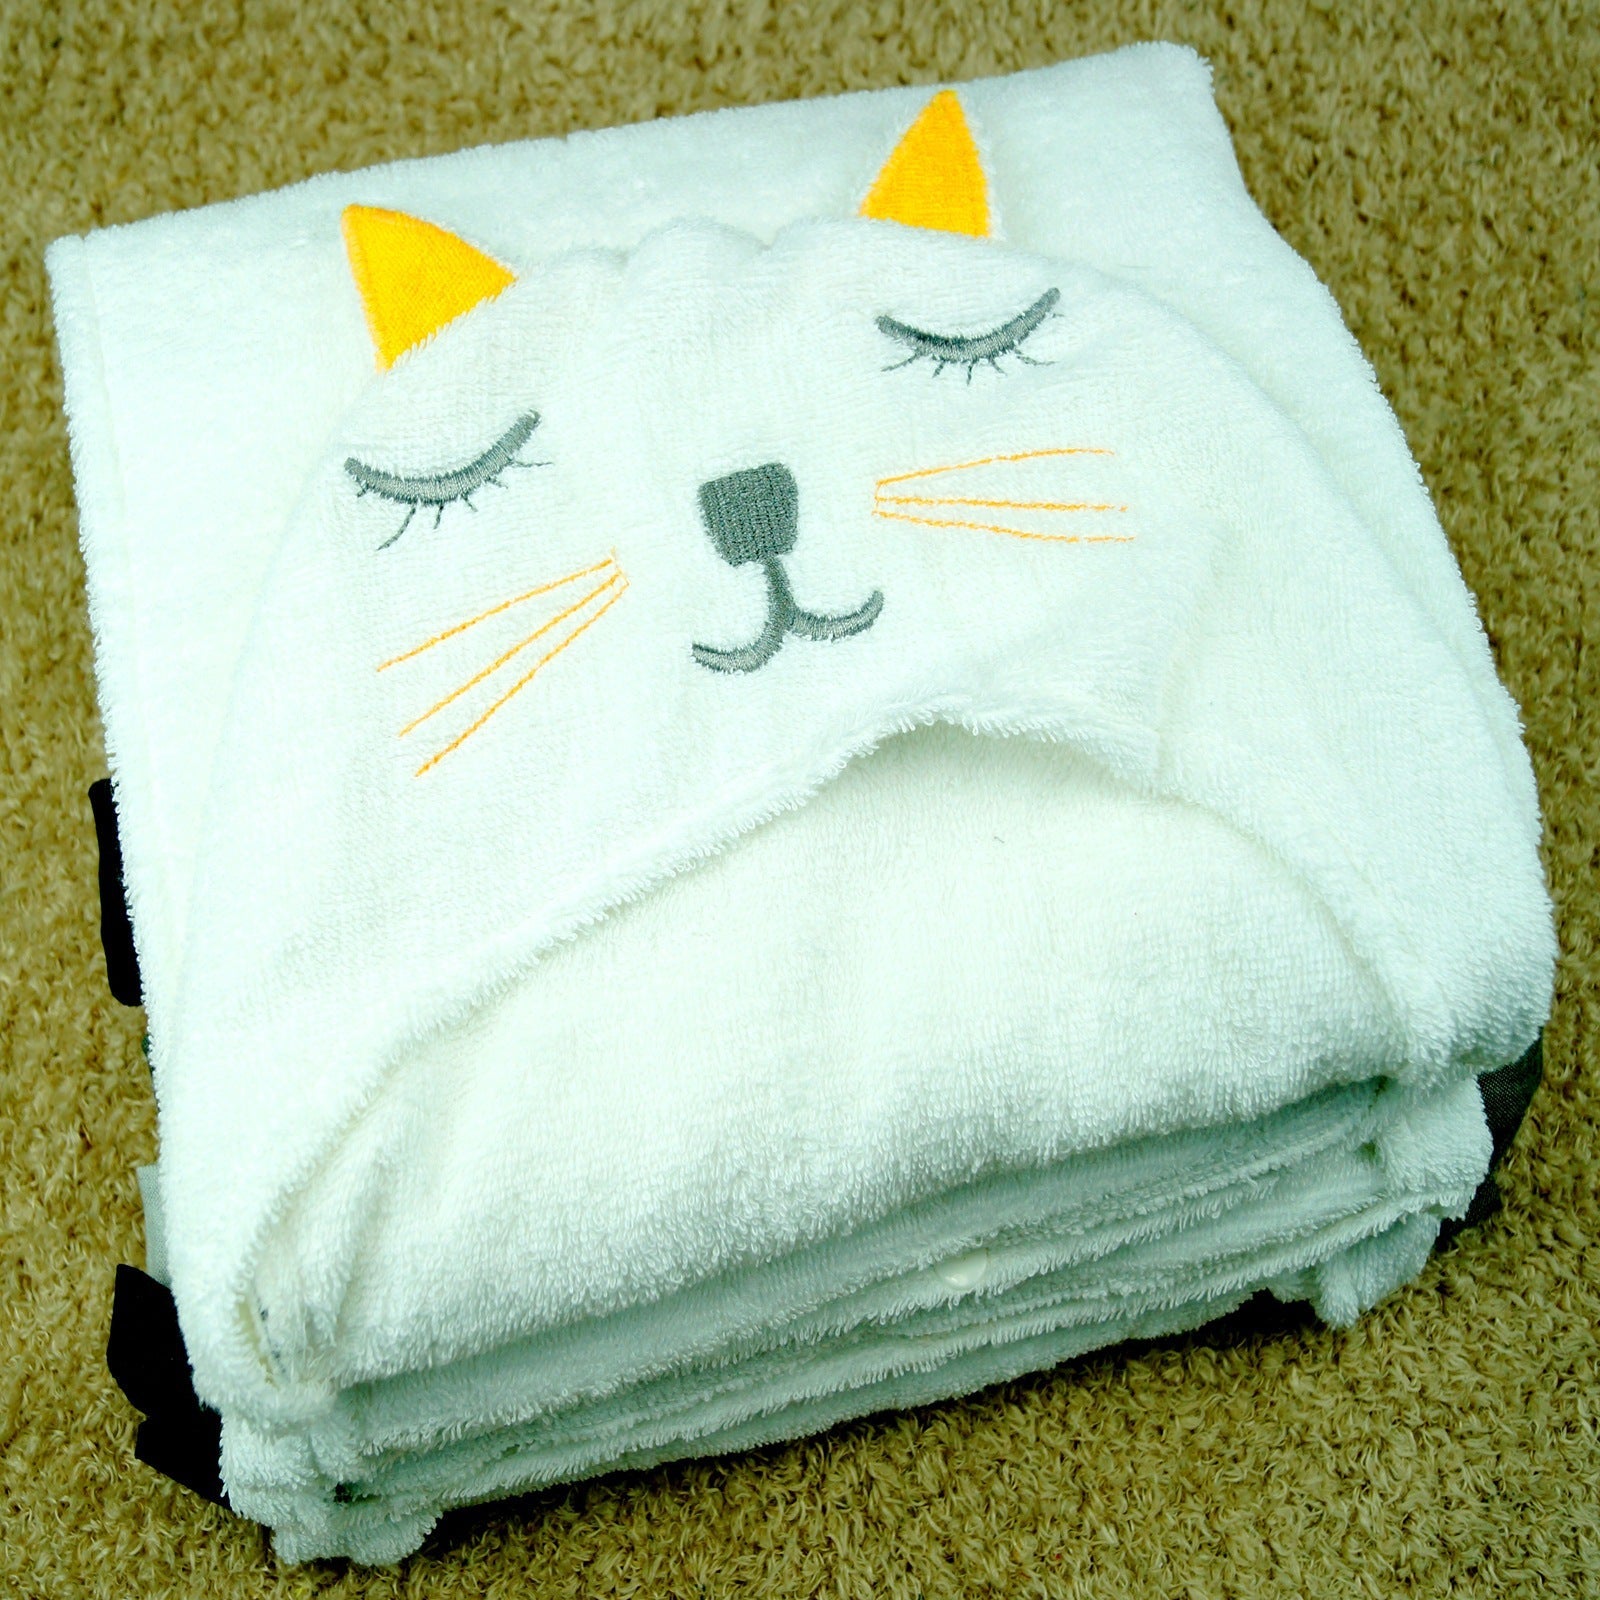 Lion King, Cute Cat Shaped Baby Bath Towel - Baby Bathing -  Trend Goods